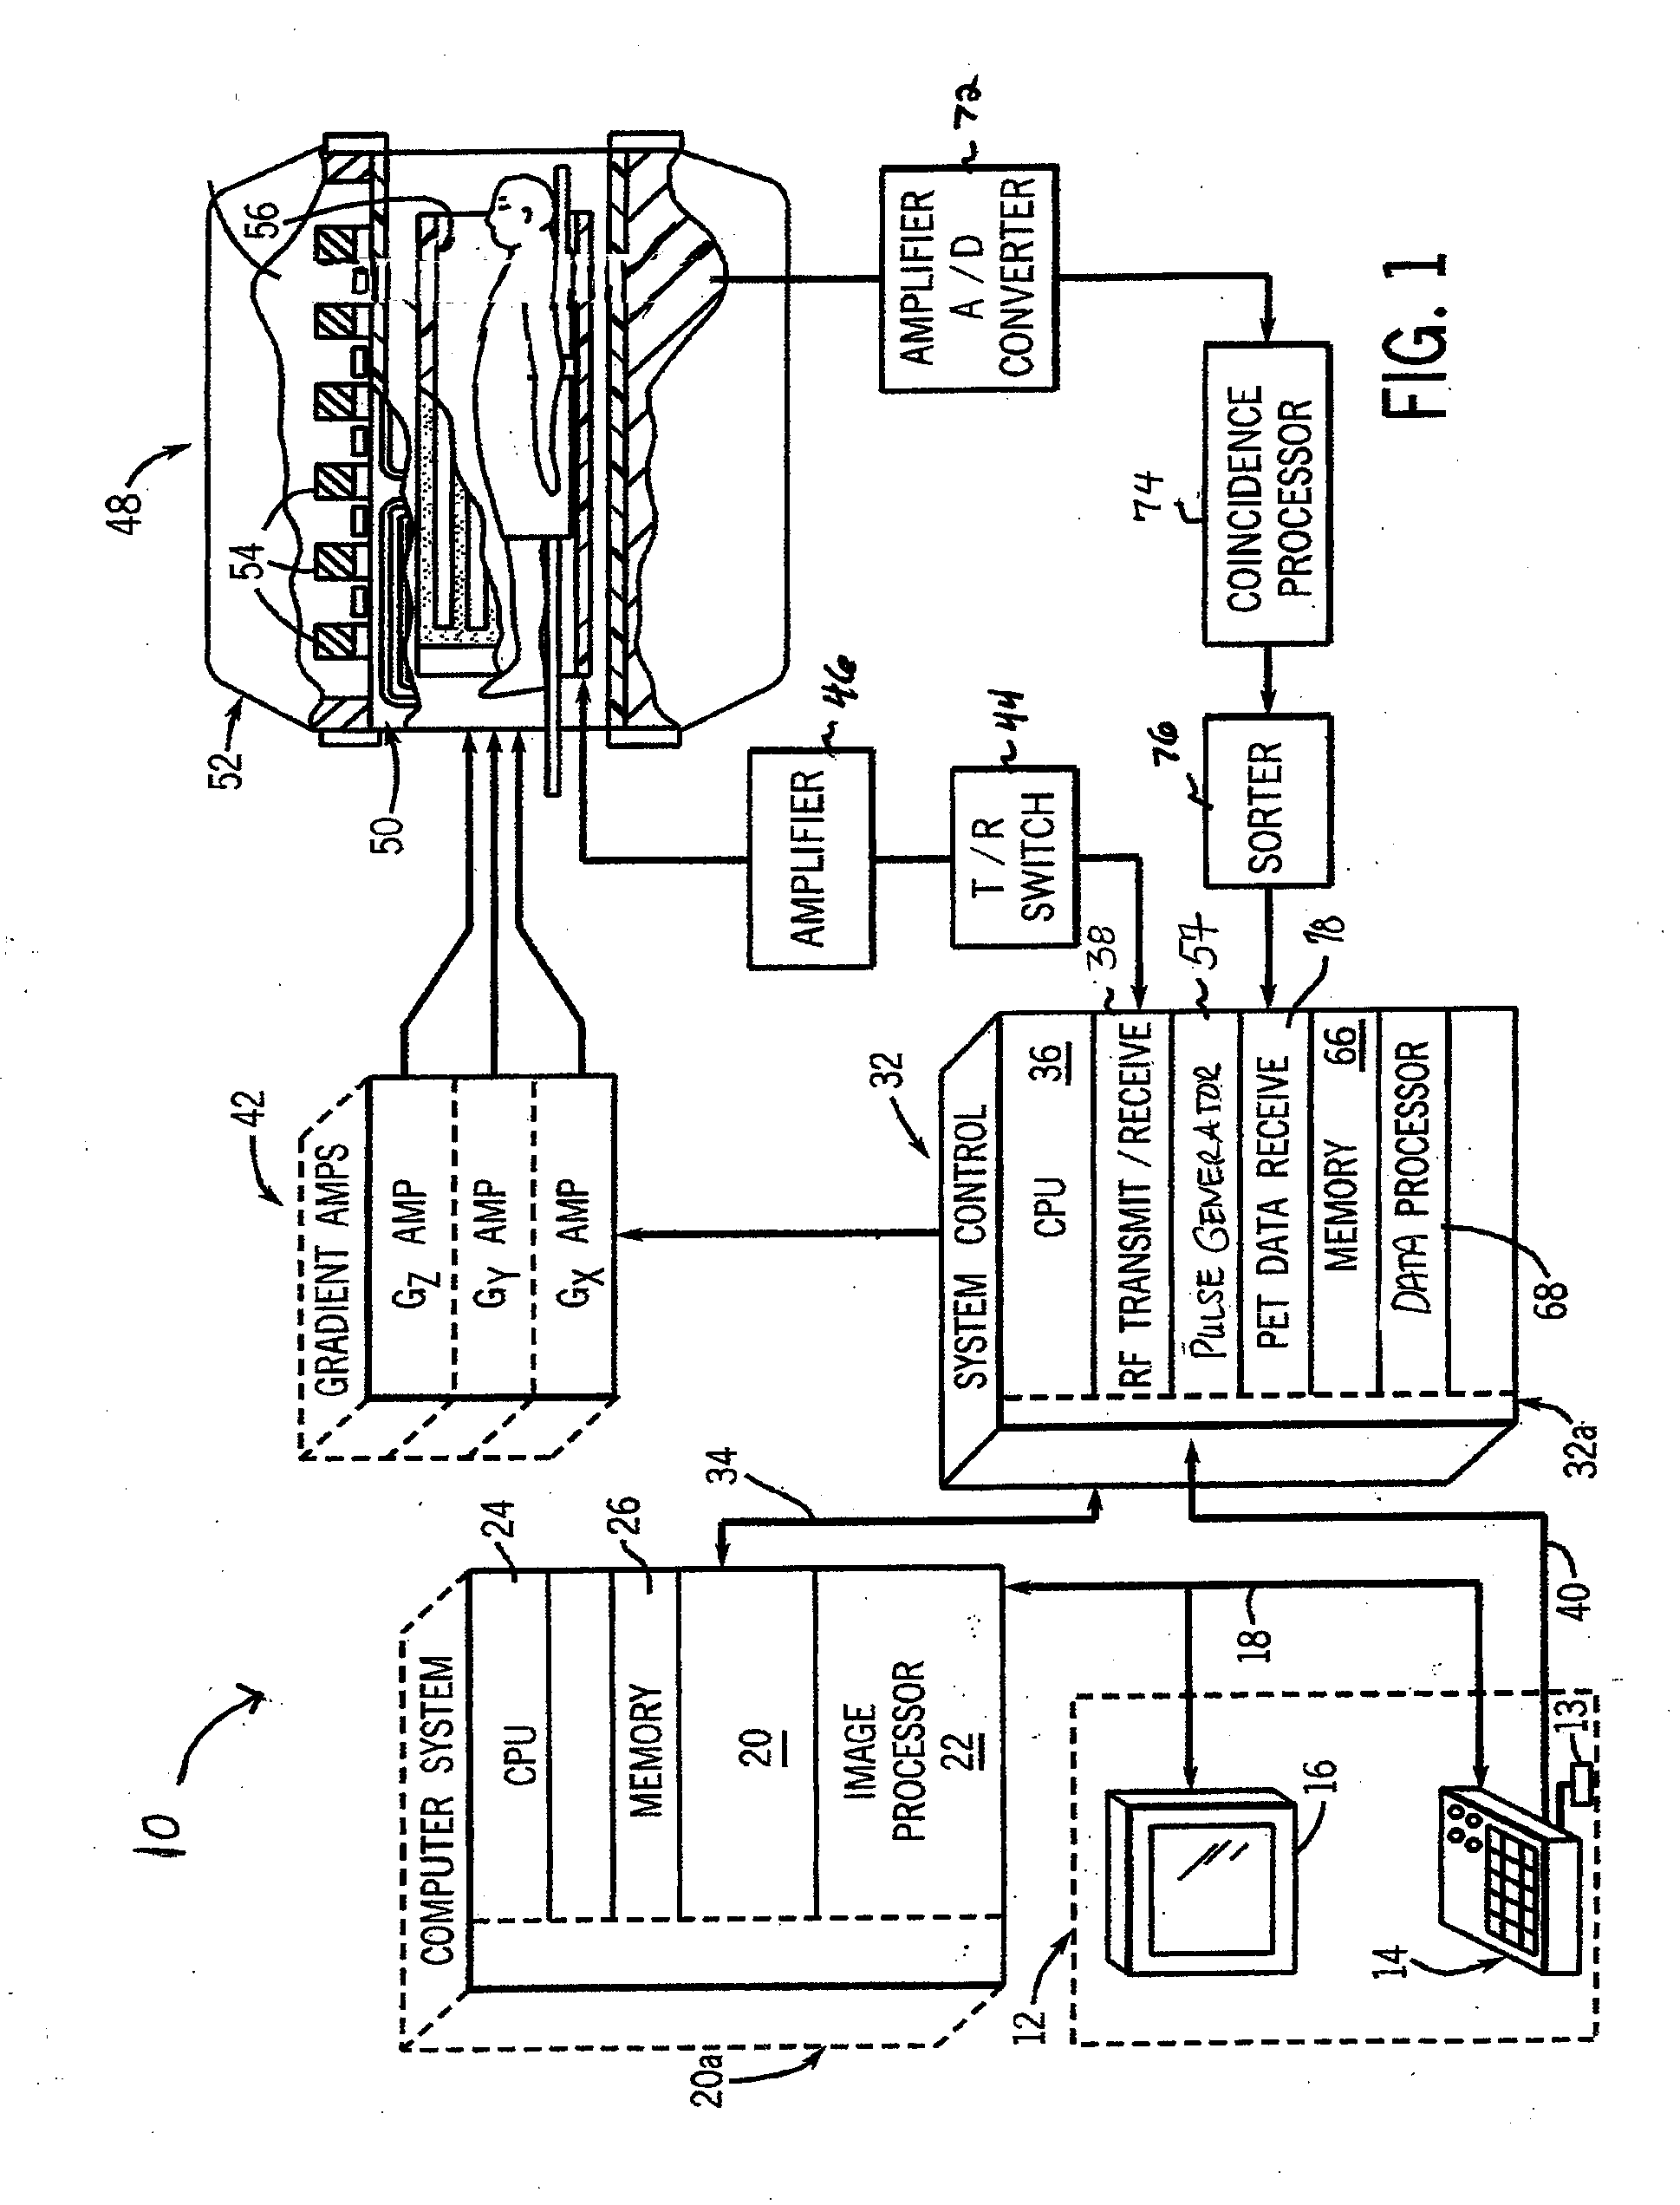 System and apparatus for detecting gamma rays in a pet/mri scanner